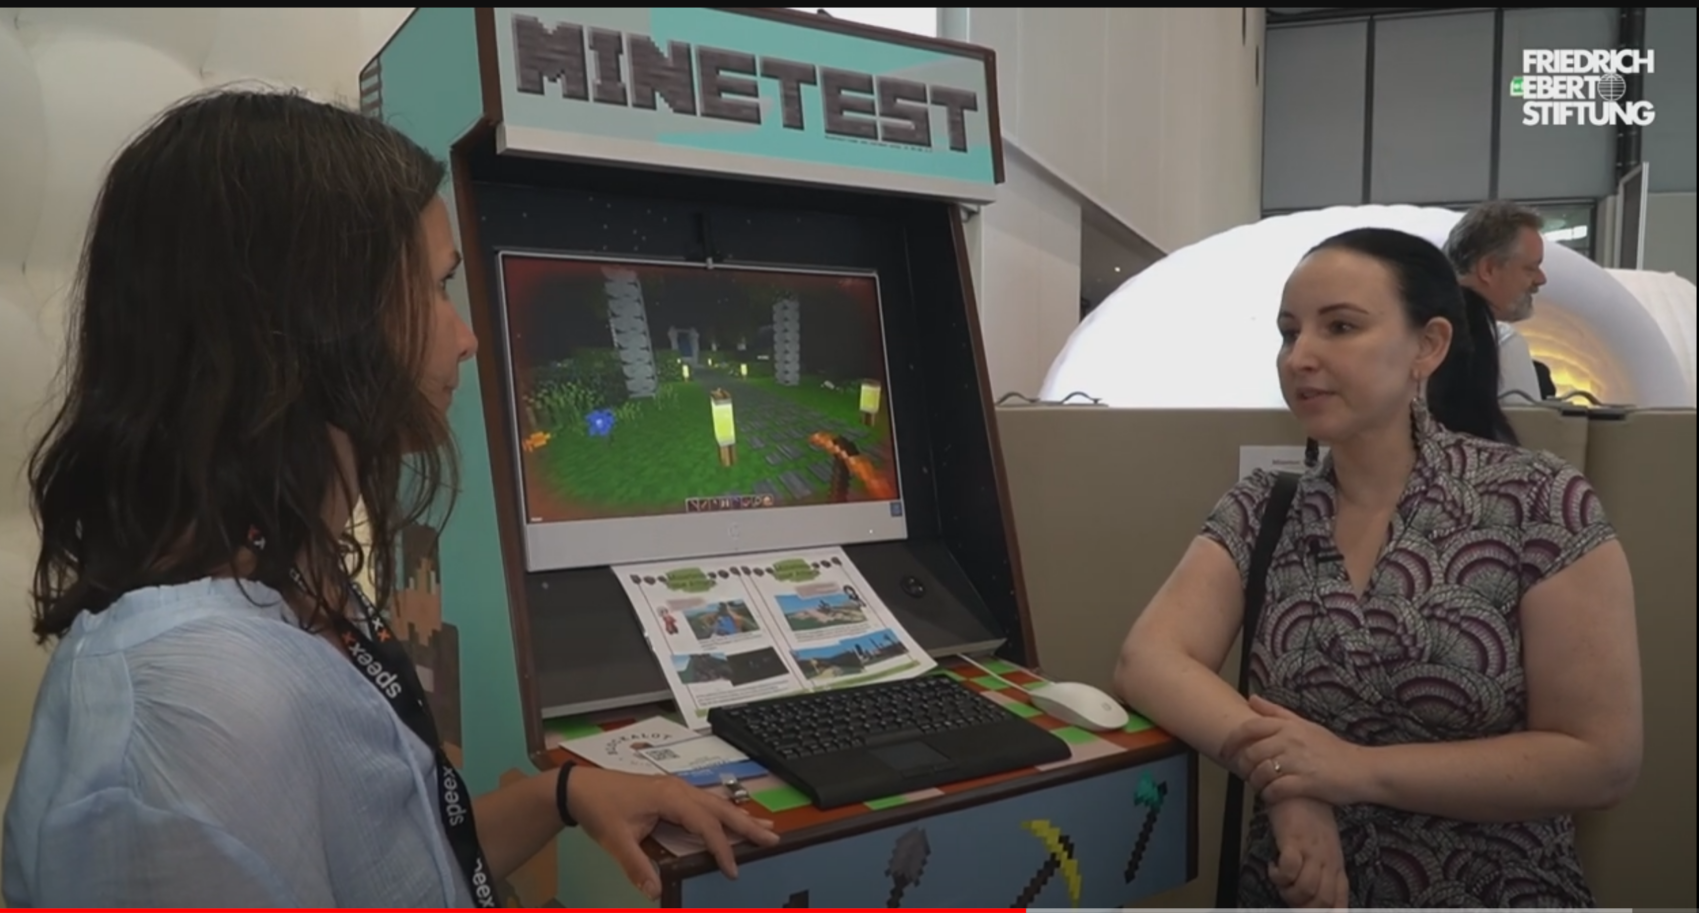 Interview on Minetest and the future of learning